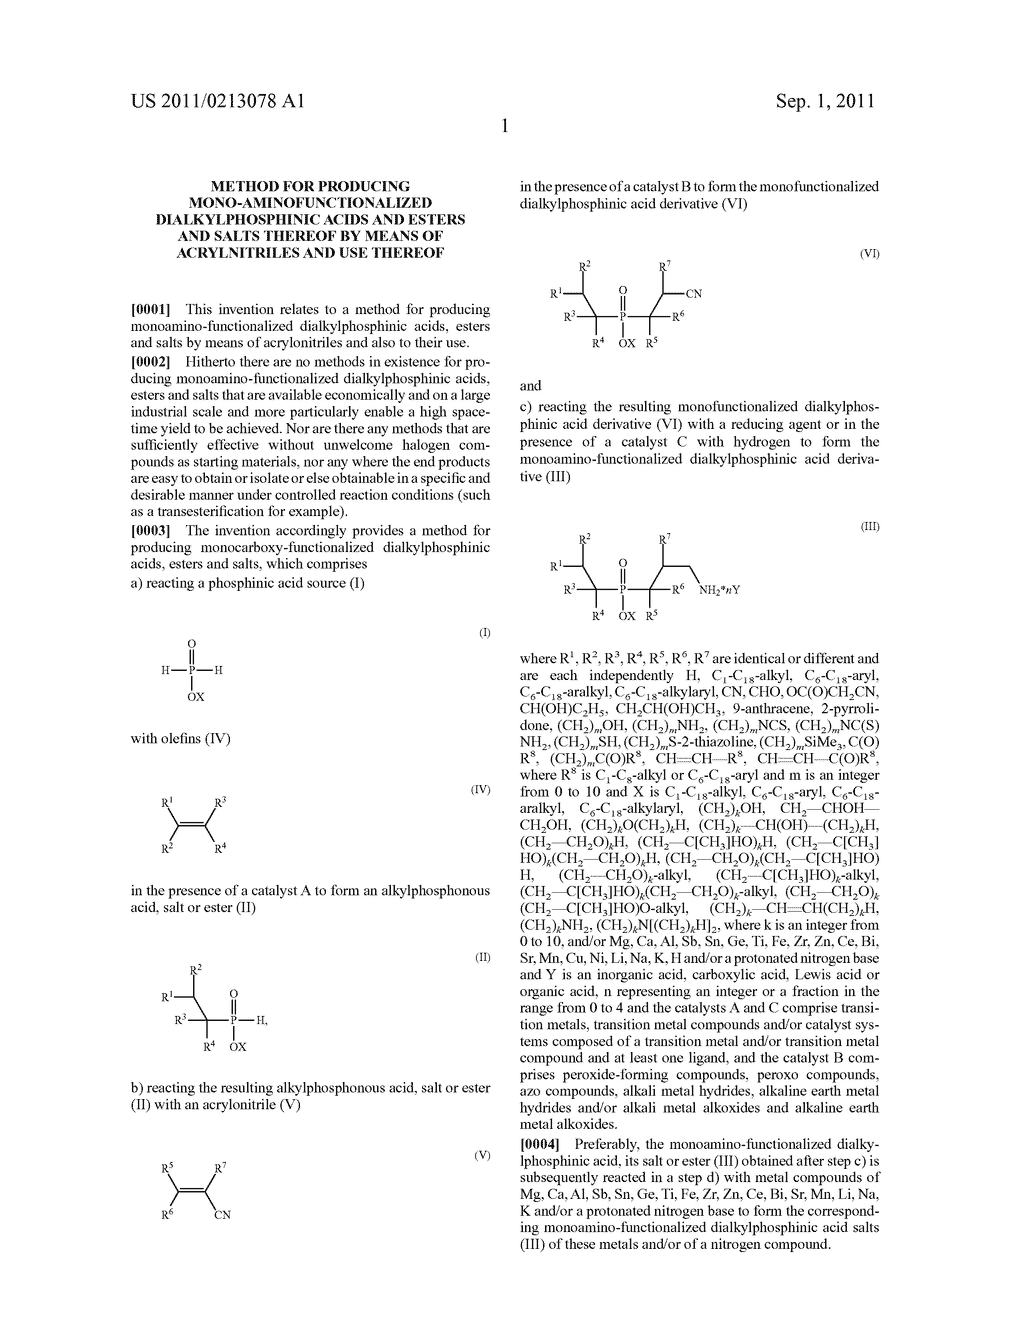 Method for Producing Mono-Aminofunctionalized Dialkylphosphinic Acids and     Esters and Salts Thereof by Means of Acrylnitriles and Use Thereof - diagram, schematic, and image 02